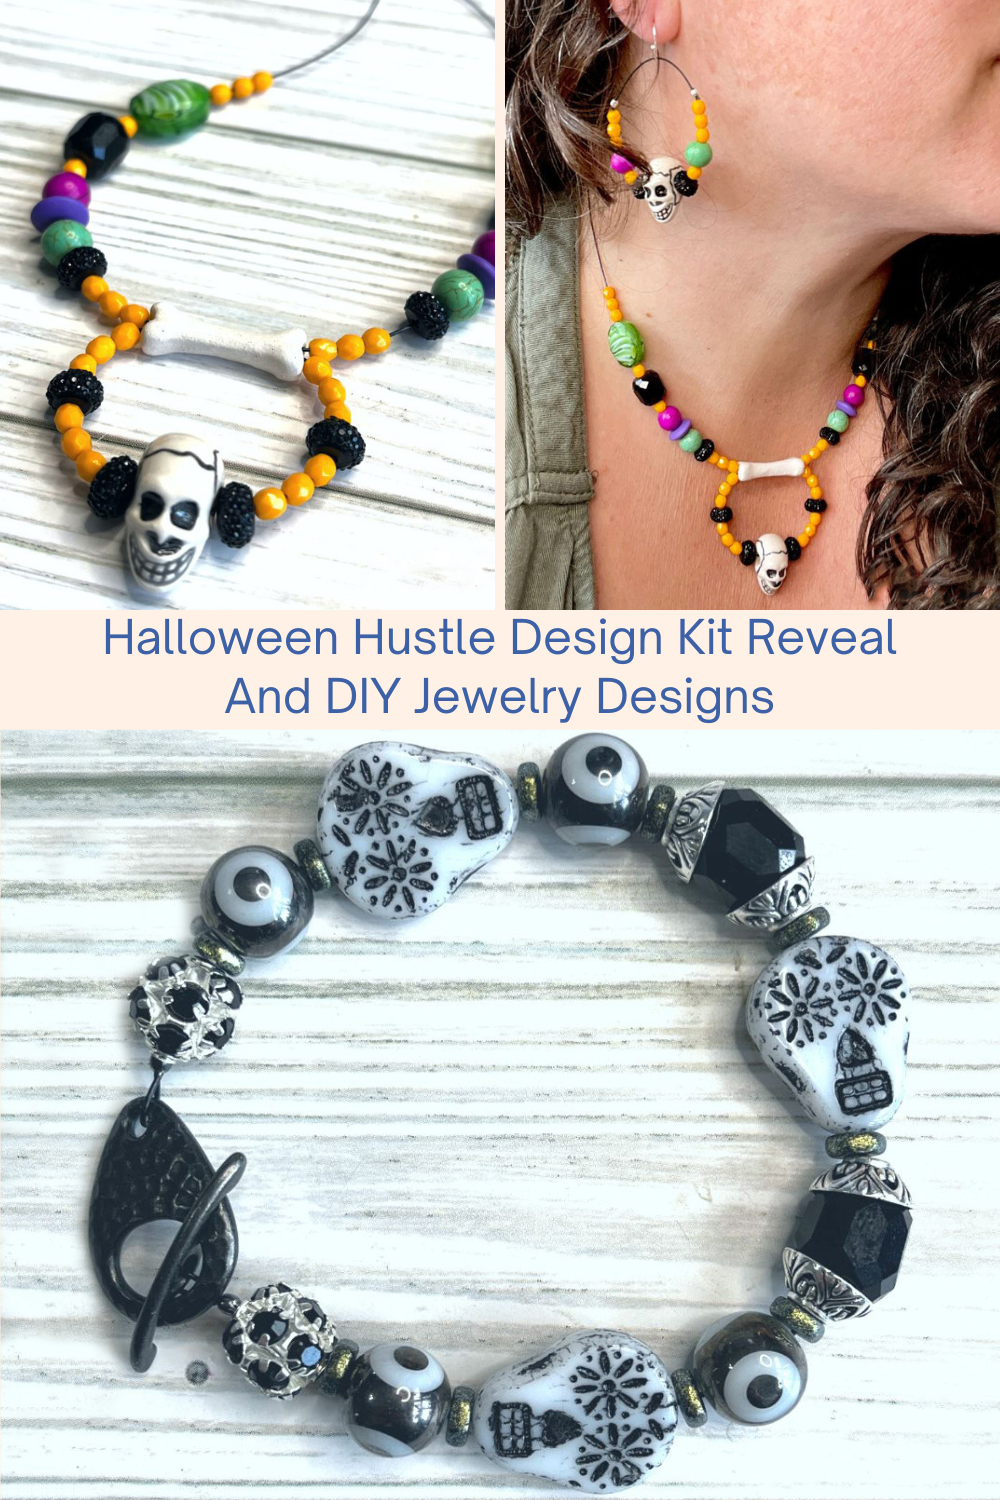 Halloween Hustle Design Kit Reveal And DIY Jewelry Designs Collage